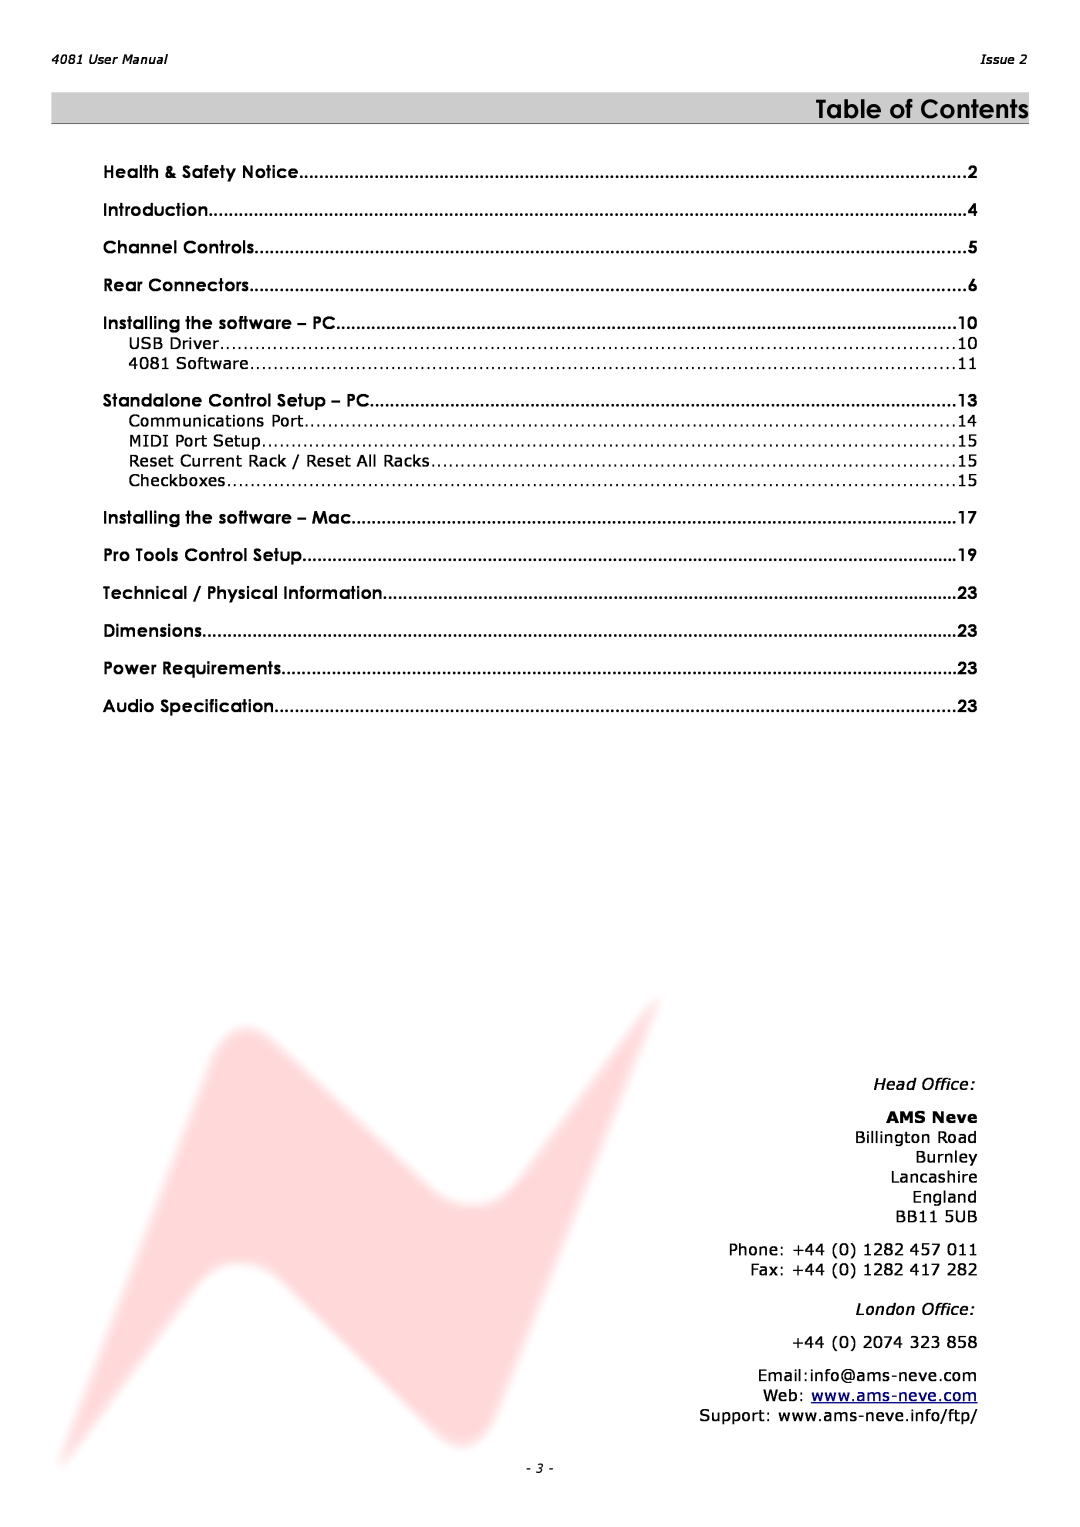 AMS 4081 user manual Table of Contents 